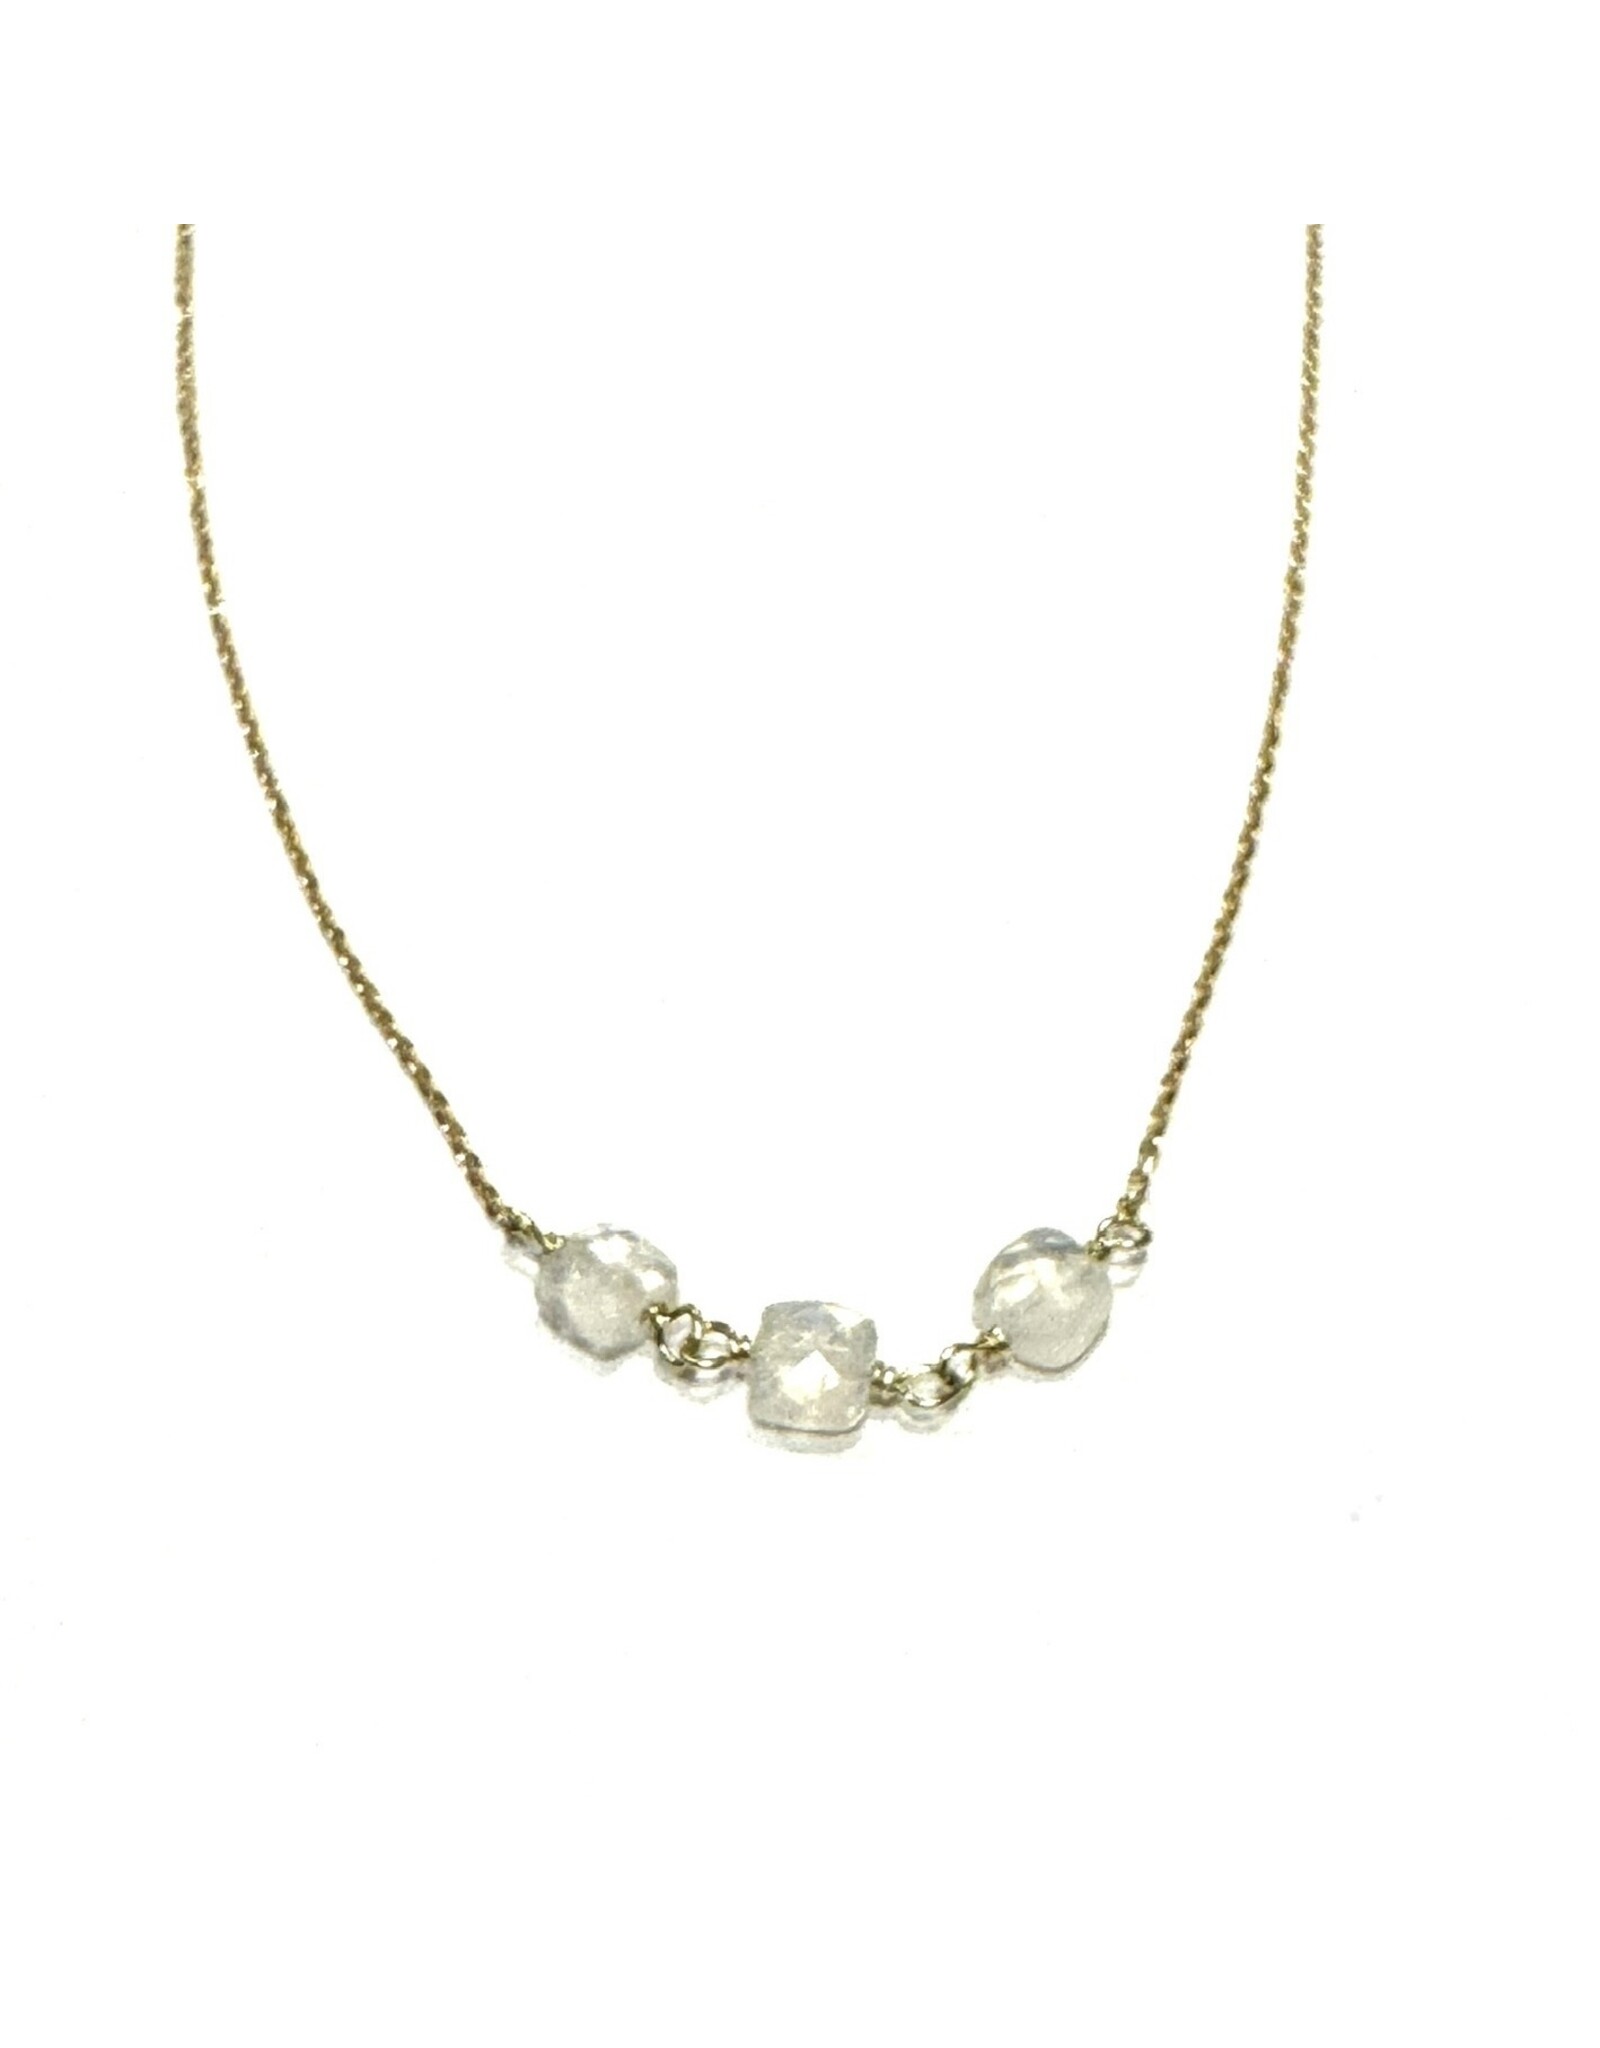 Bo Gold Necklace - Gold - Moonstone